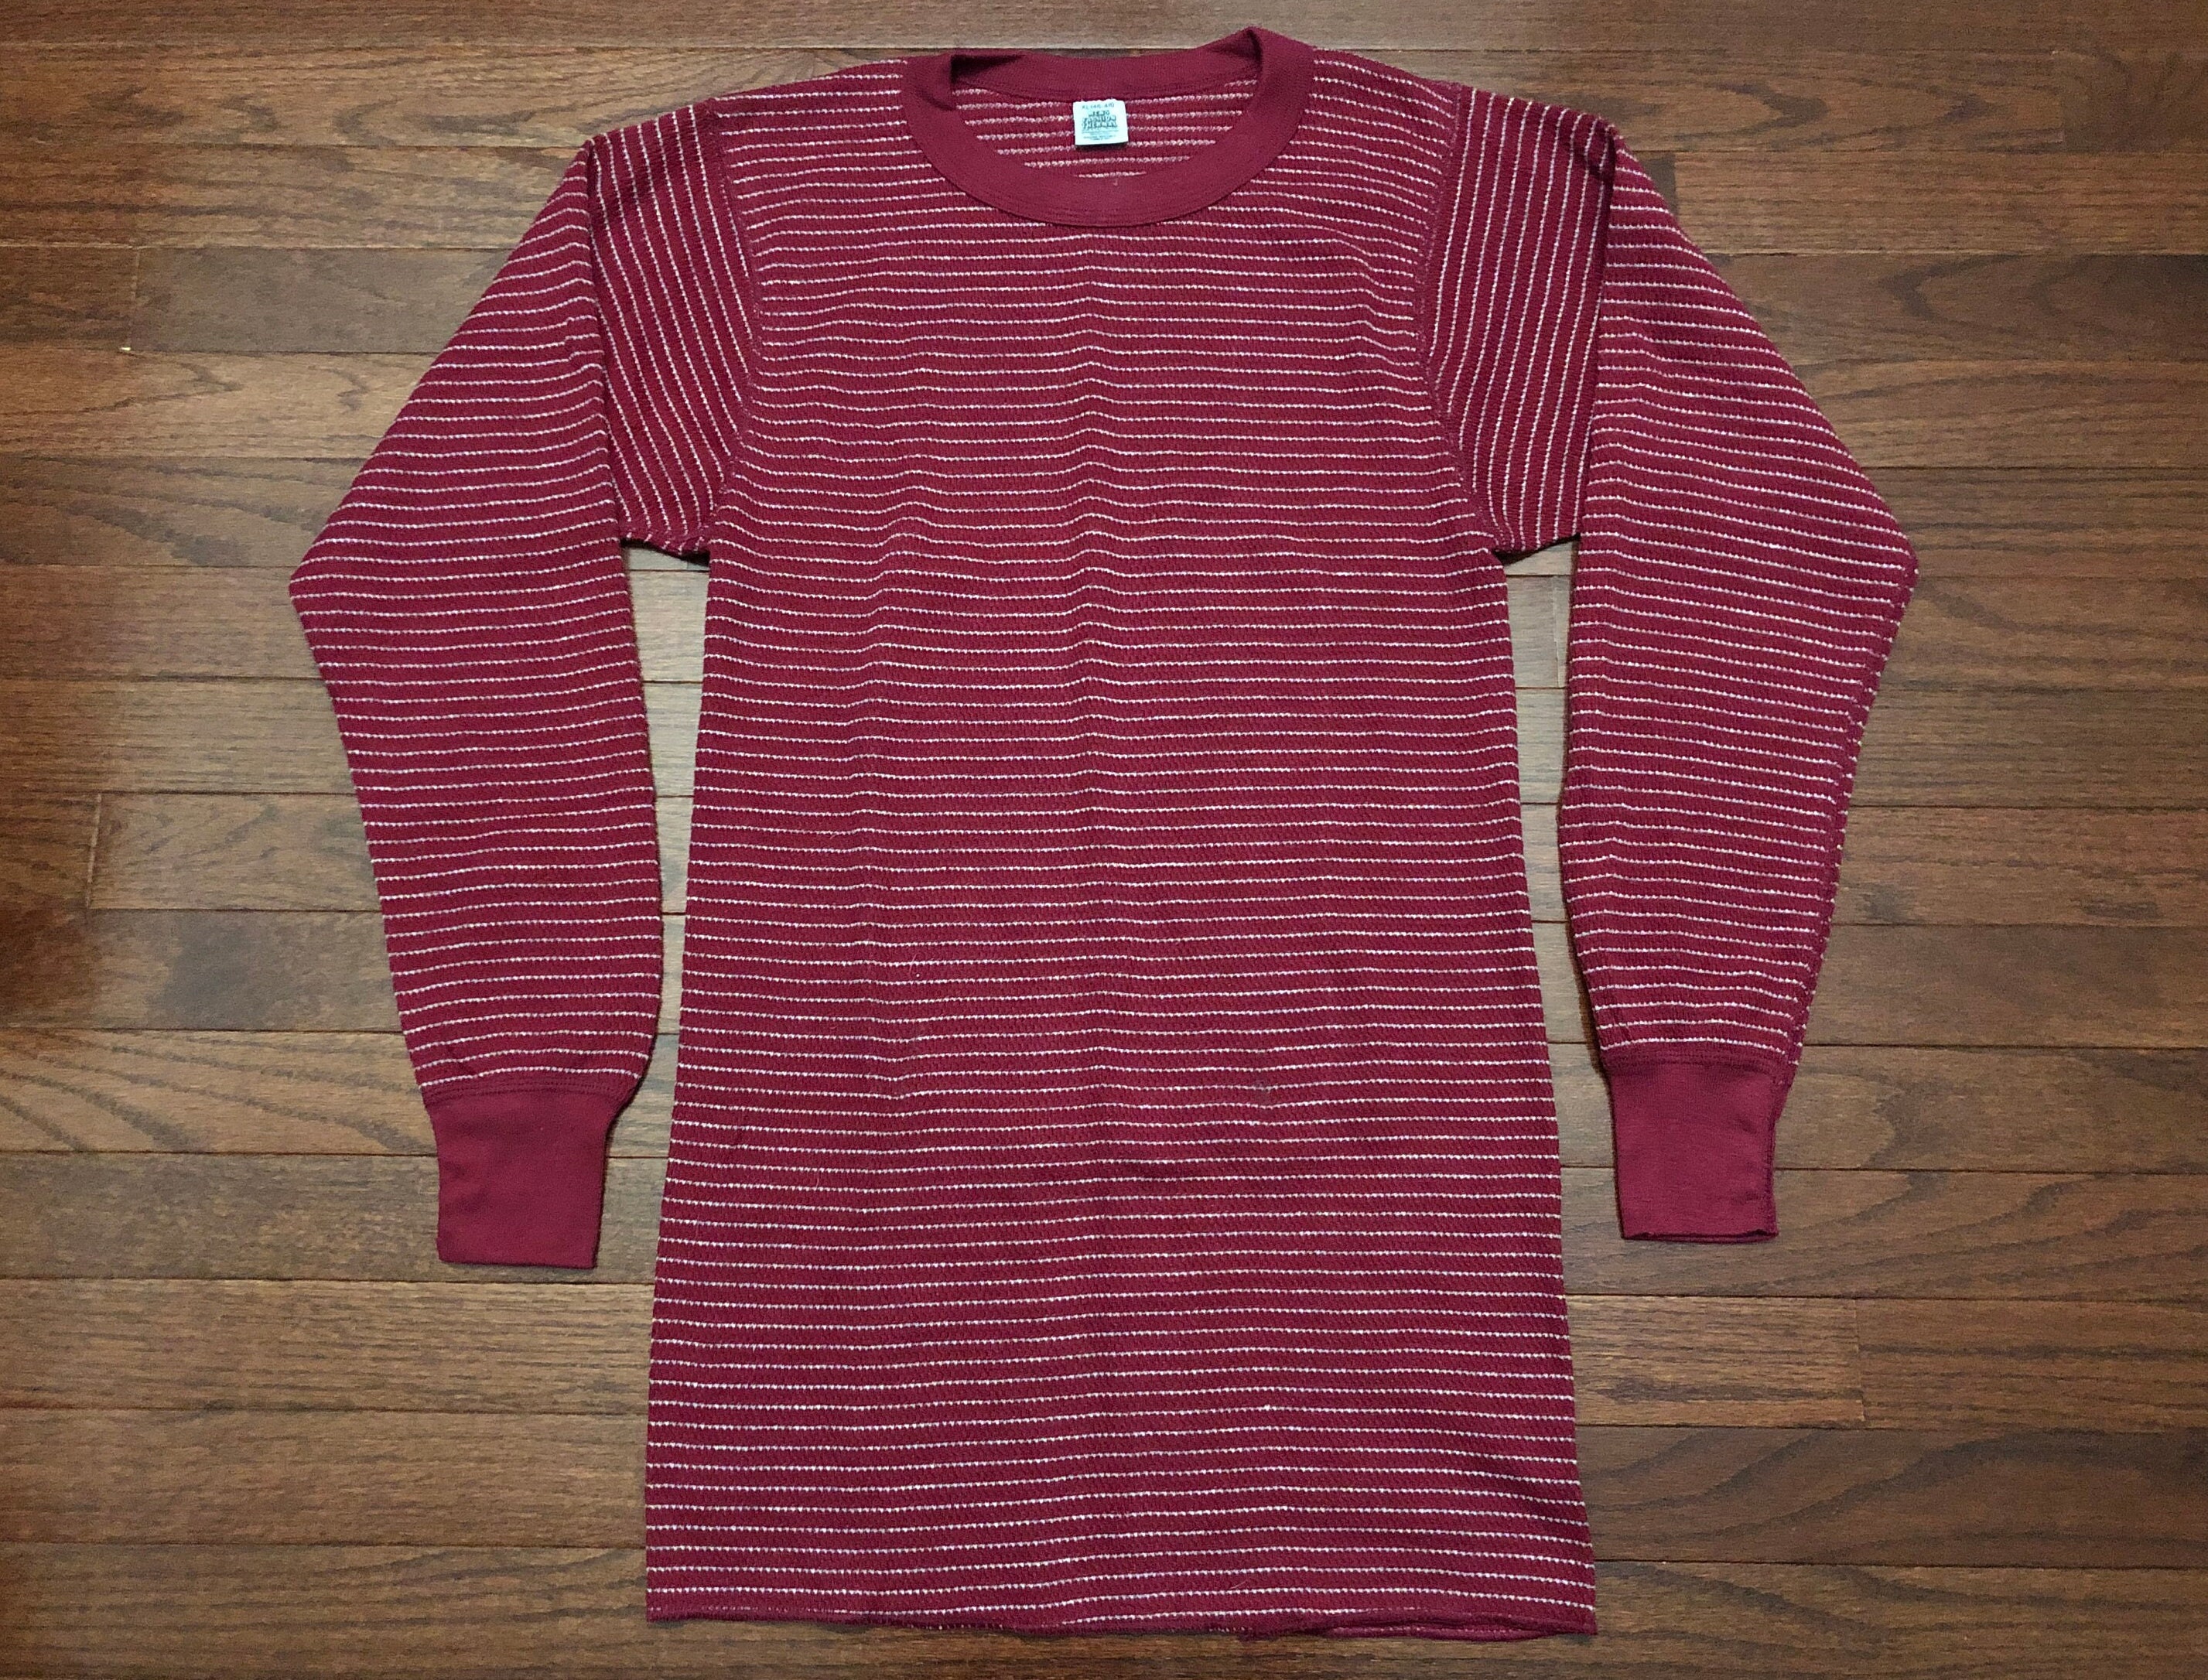 Stanley Men's Thermal Crew Shirt with Long Sleeves & Pocket, Burgundy Heather, X-Large